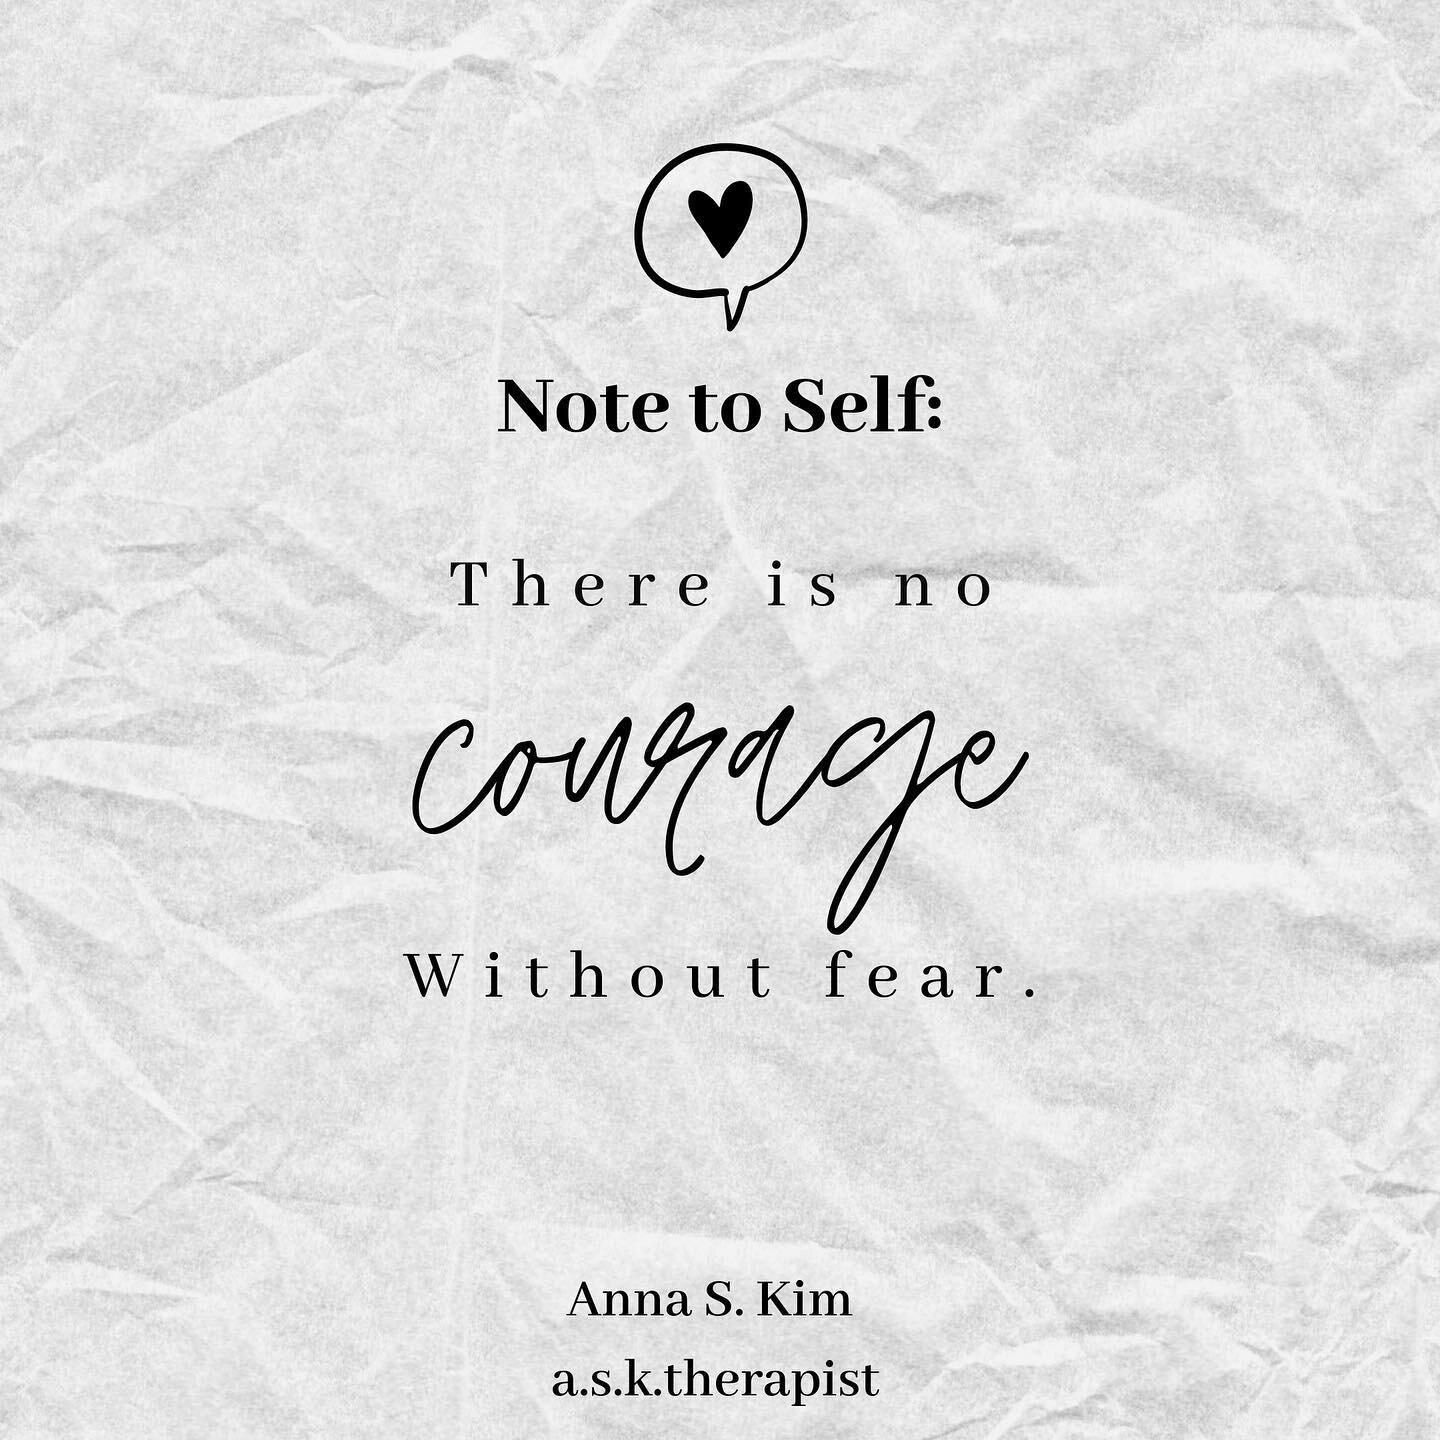 My mantra these days. I used to avoid fear like the plague, but have you noticed how avoiding fear causes even more anxiety? Fear plays a purpose in our lives too, and lately it&rsquo;s been telling me to be brave and courageous. 

How are you practi